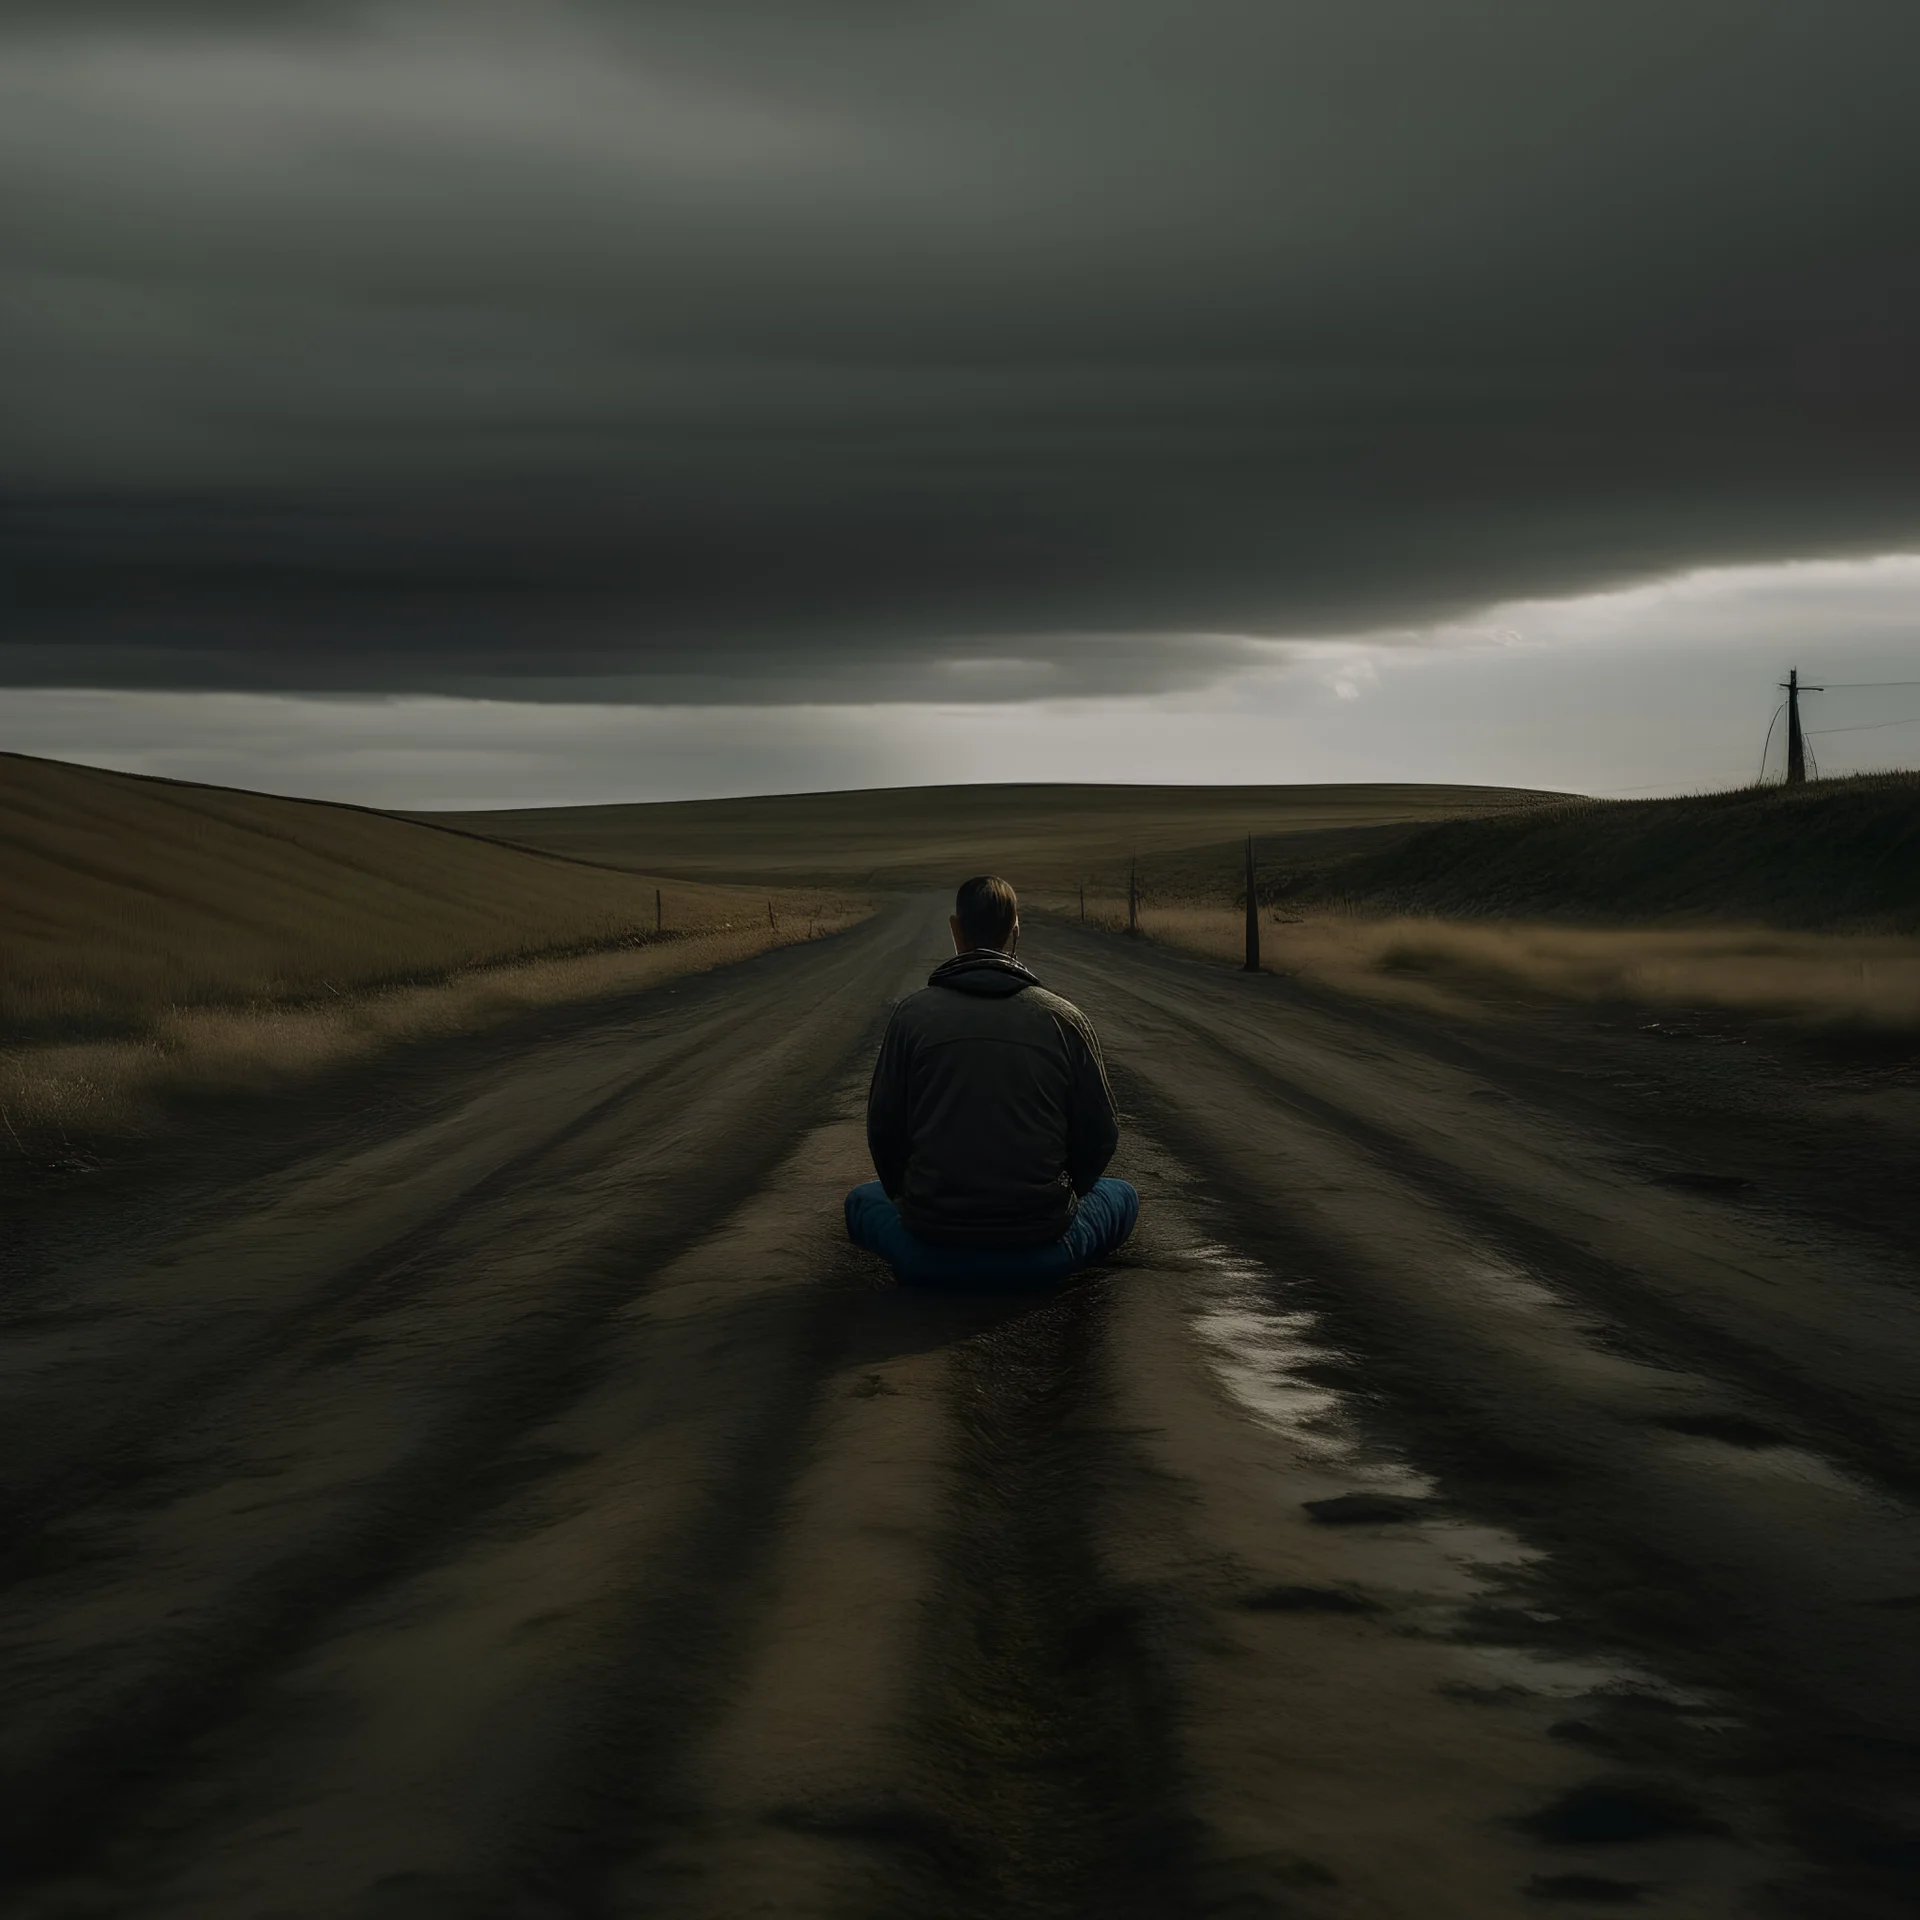 A dark dirt road with a man sitting in the middle, looking straight ahead